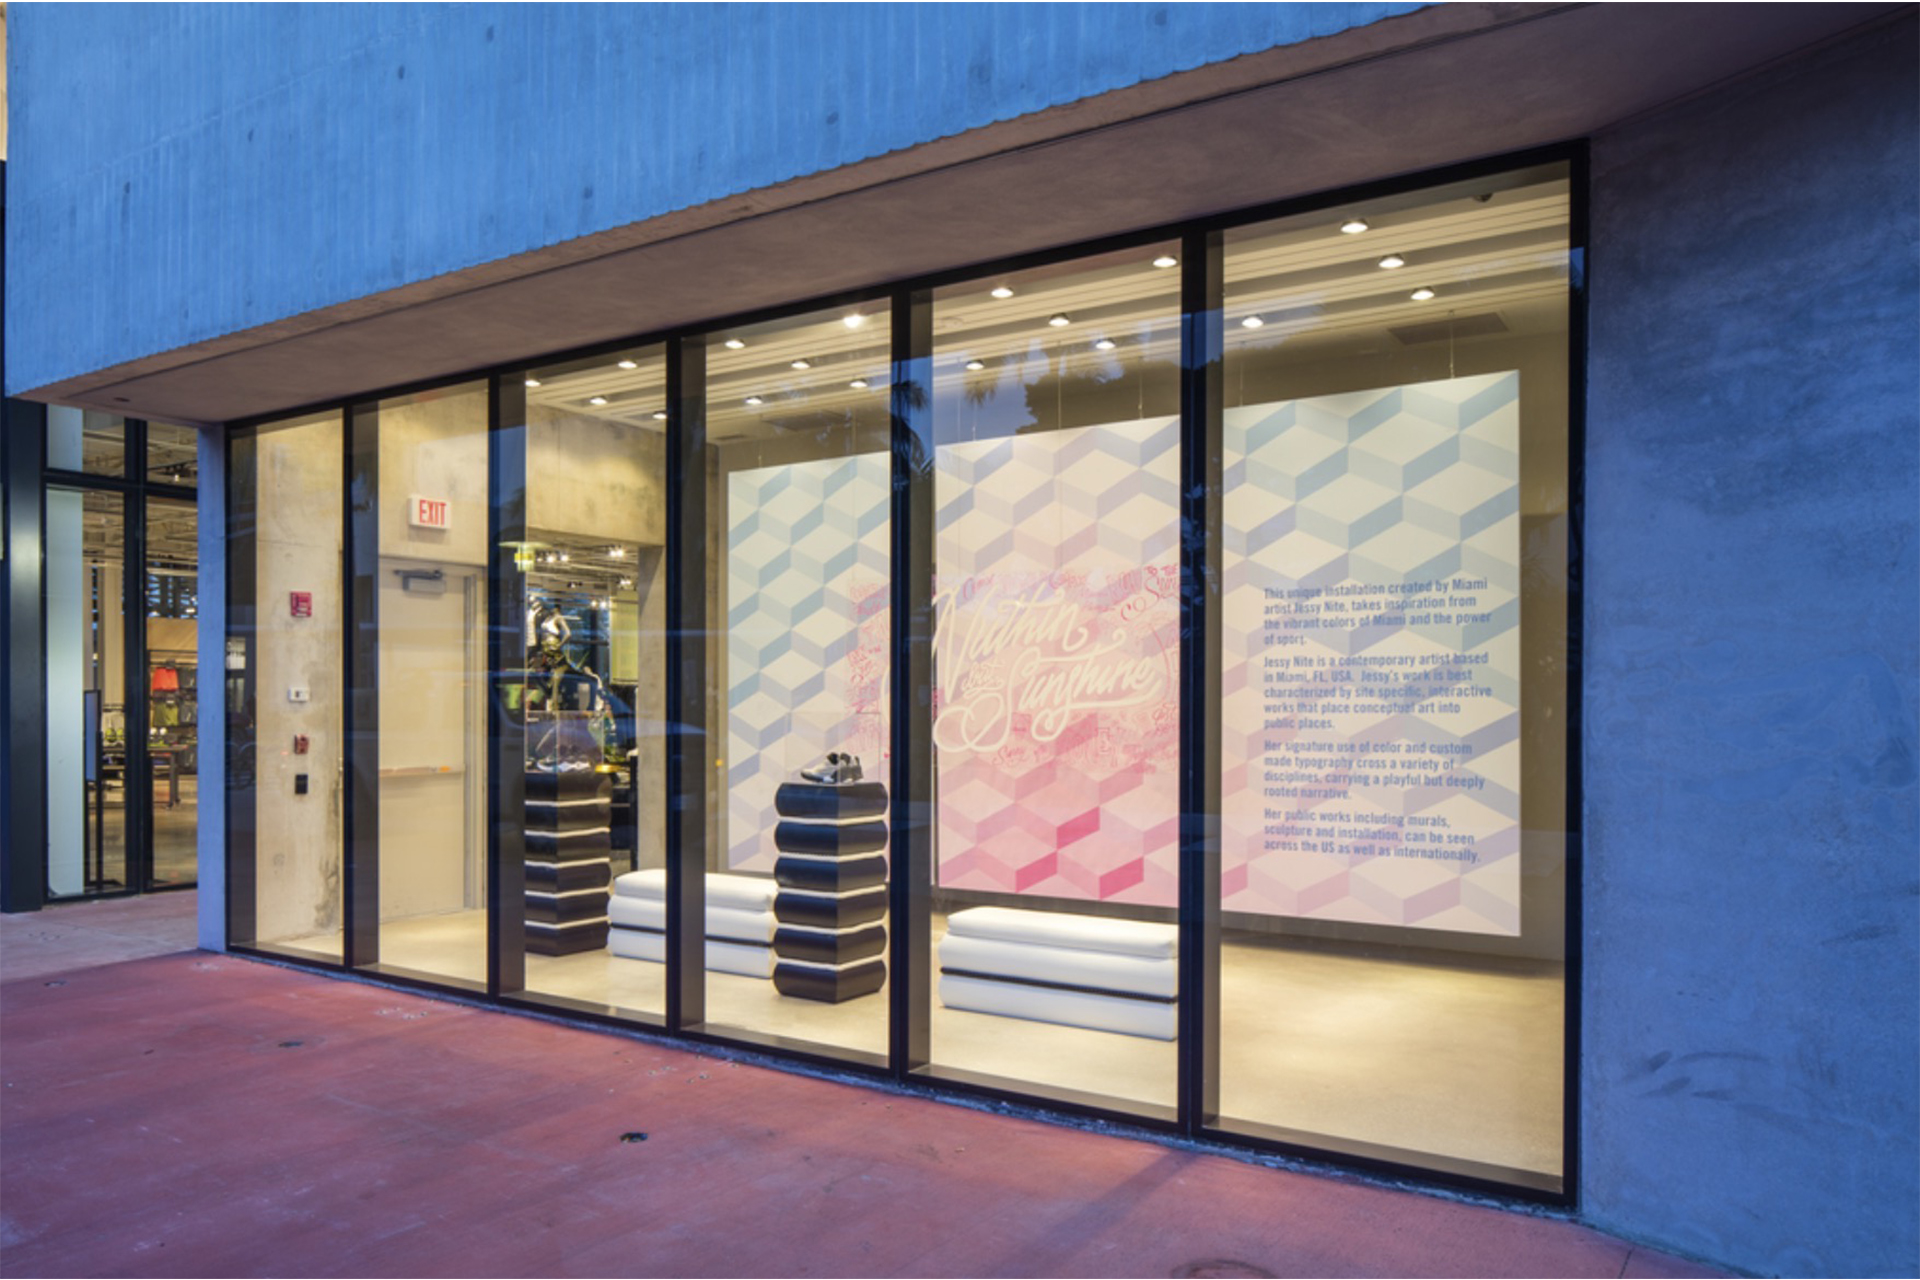 Nike Commisions Artist Jessie for Installation at Their New Miami Flagship Store — ICNCLST/